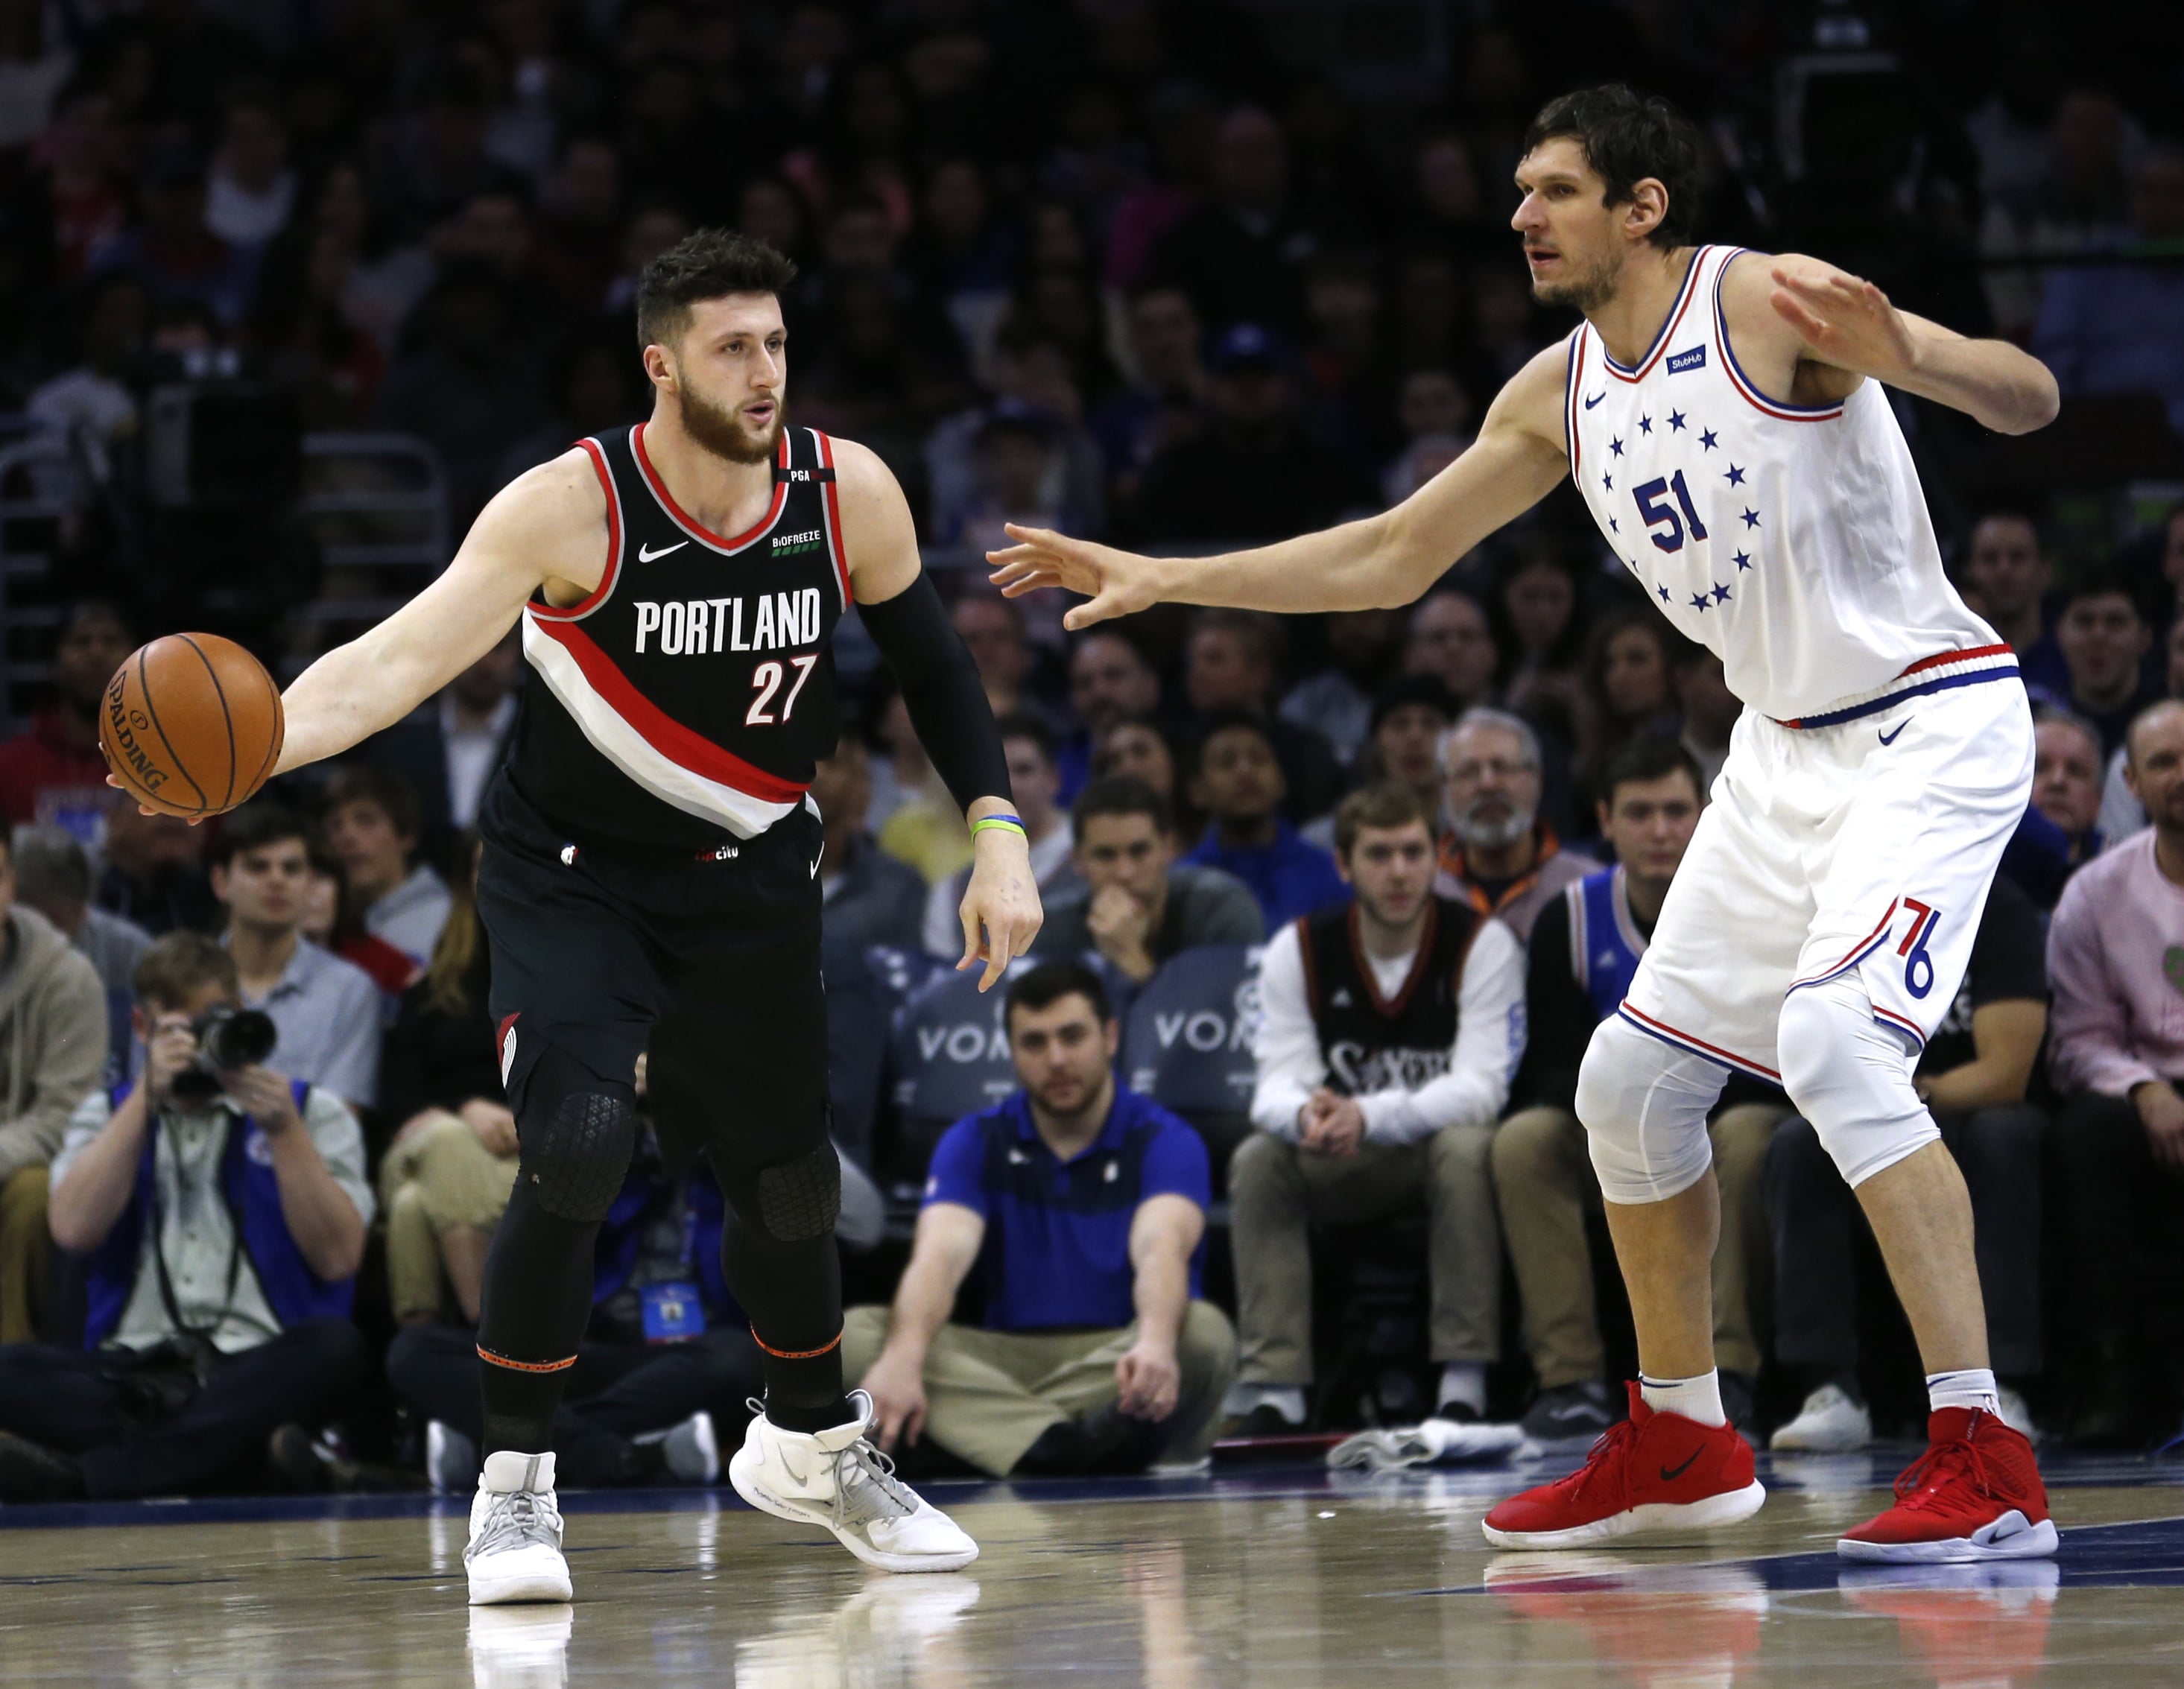 Portland Trail Blazers center Jusuf Nurkic (27) moves the ball around Philadelphia 76ers center Boban Marjanovic (51) during the first half on an NBA basketball game, Saturday, Feb. 23, 2019, in Philadelphia.